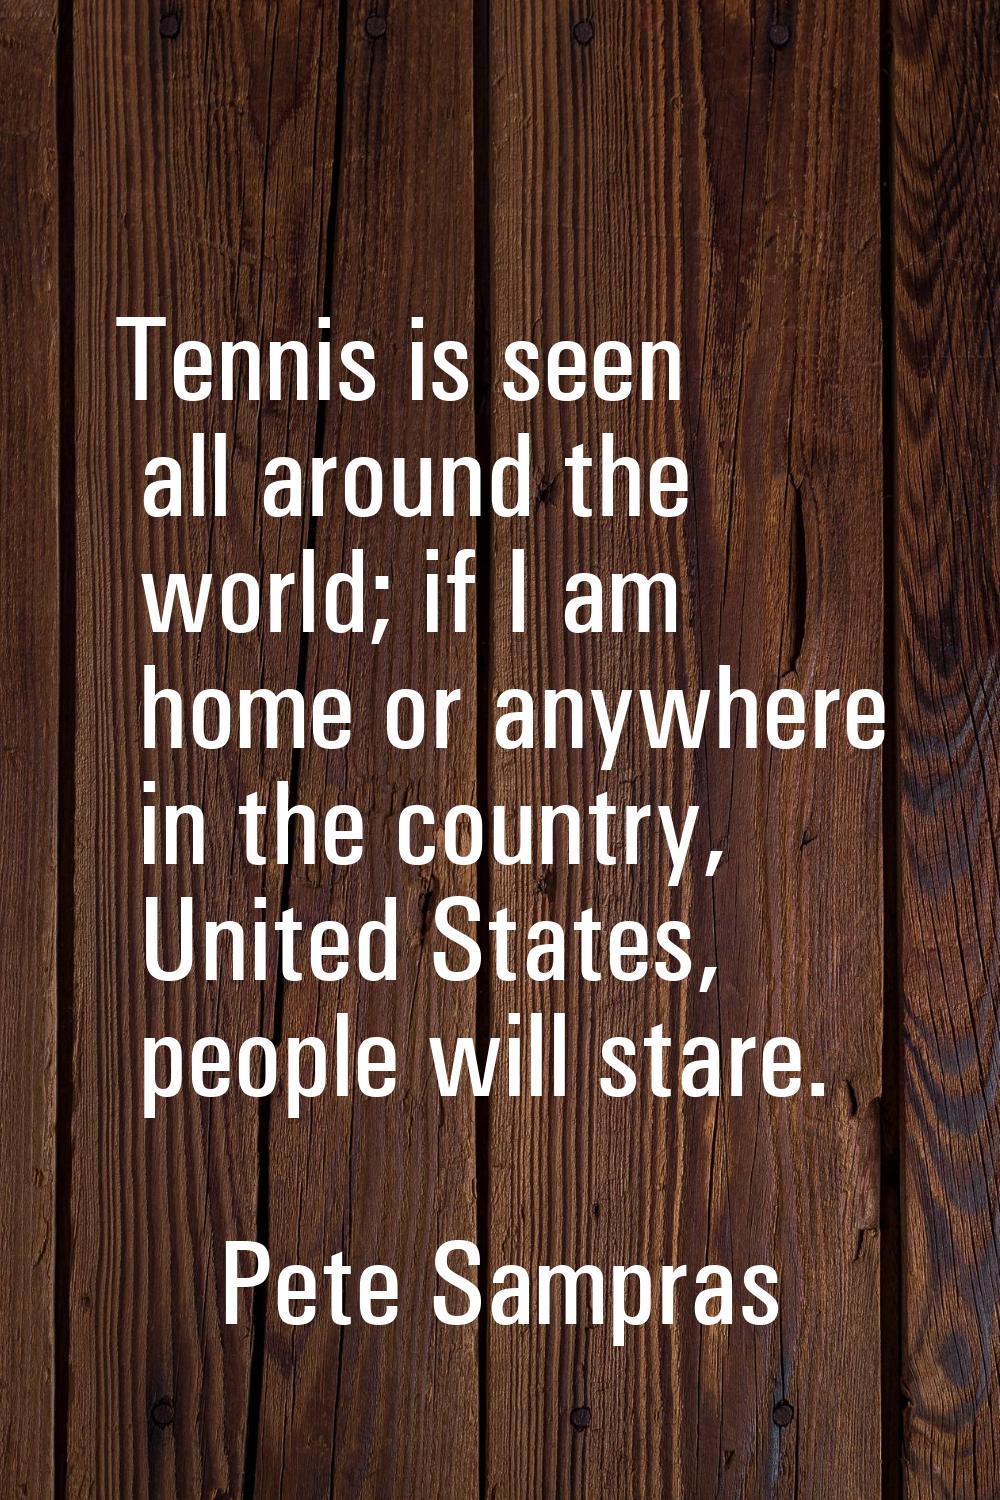 Tennis is seen all around the world; if I am home or anywhere in the country, United States, people